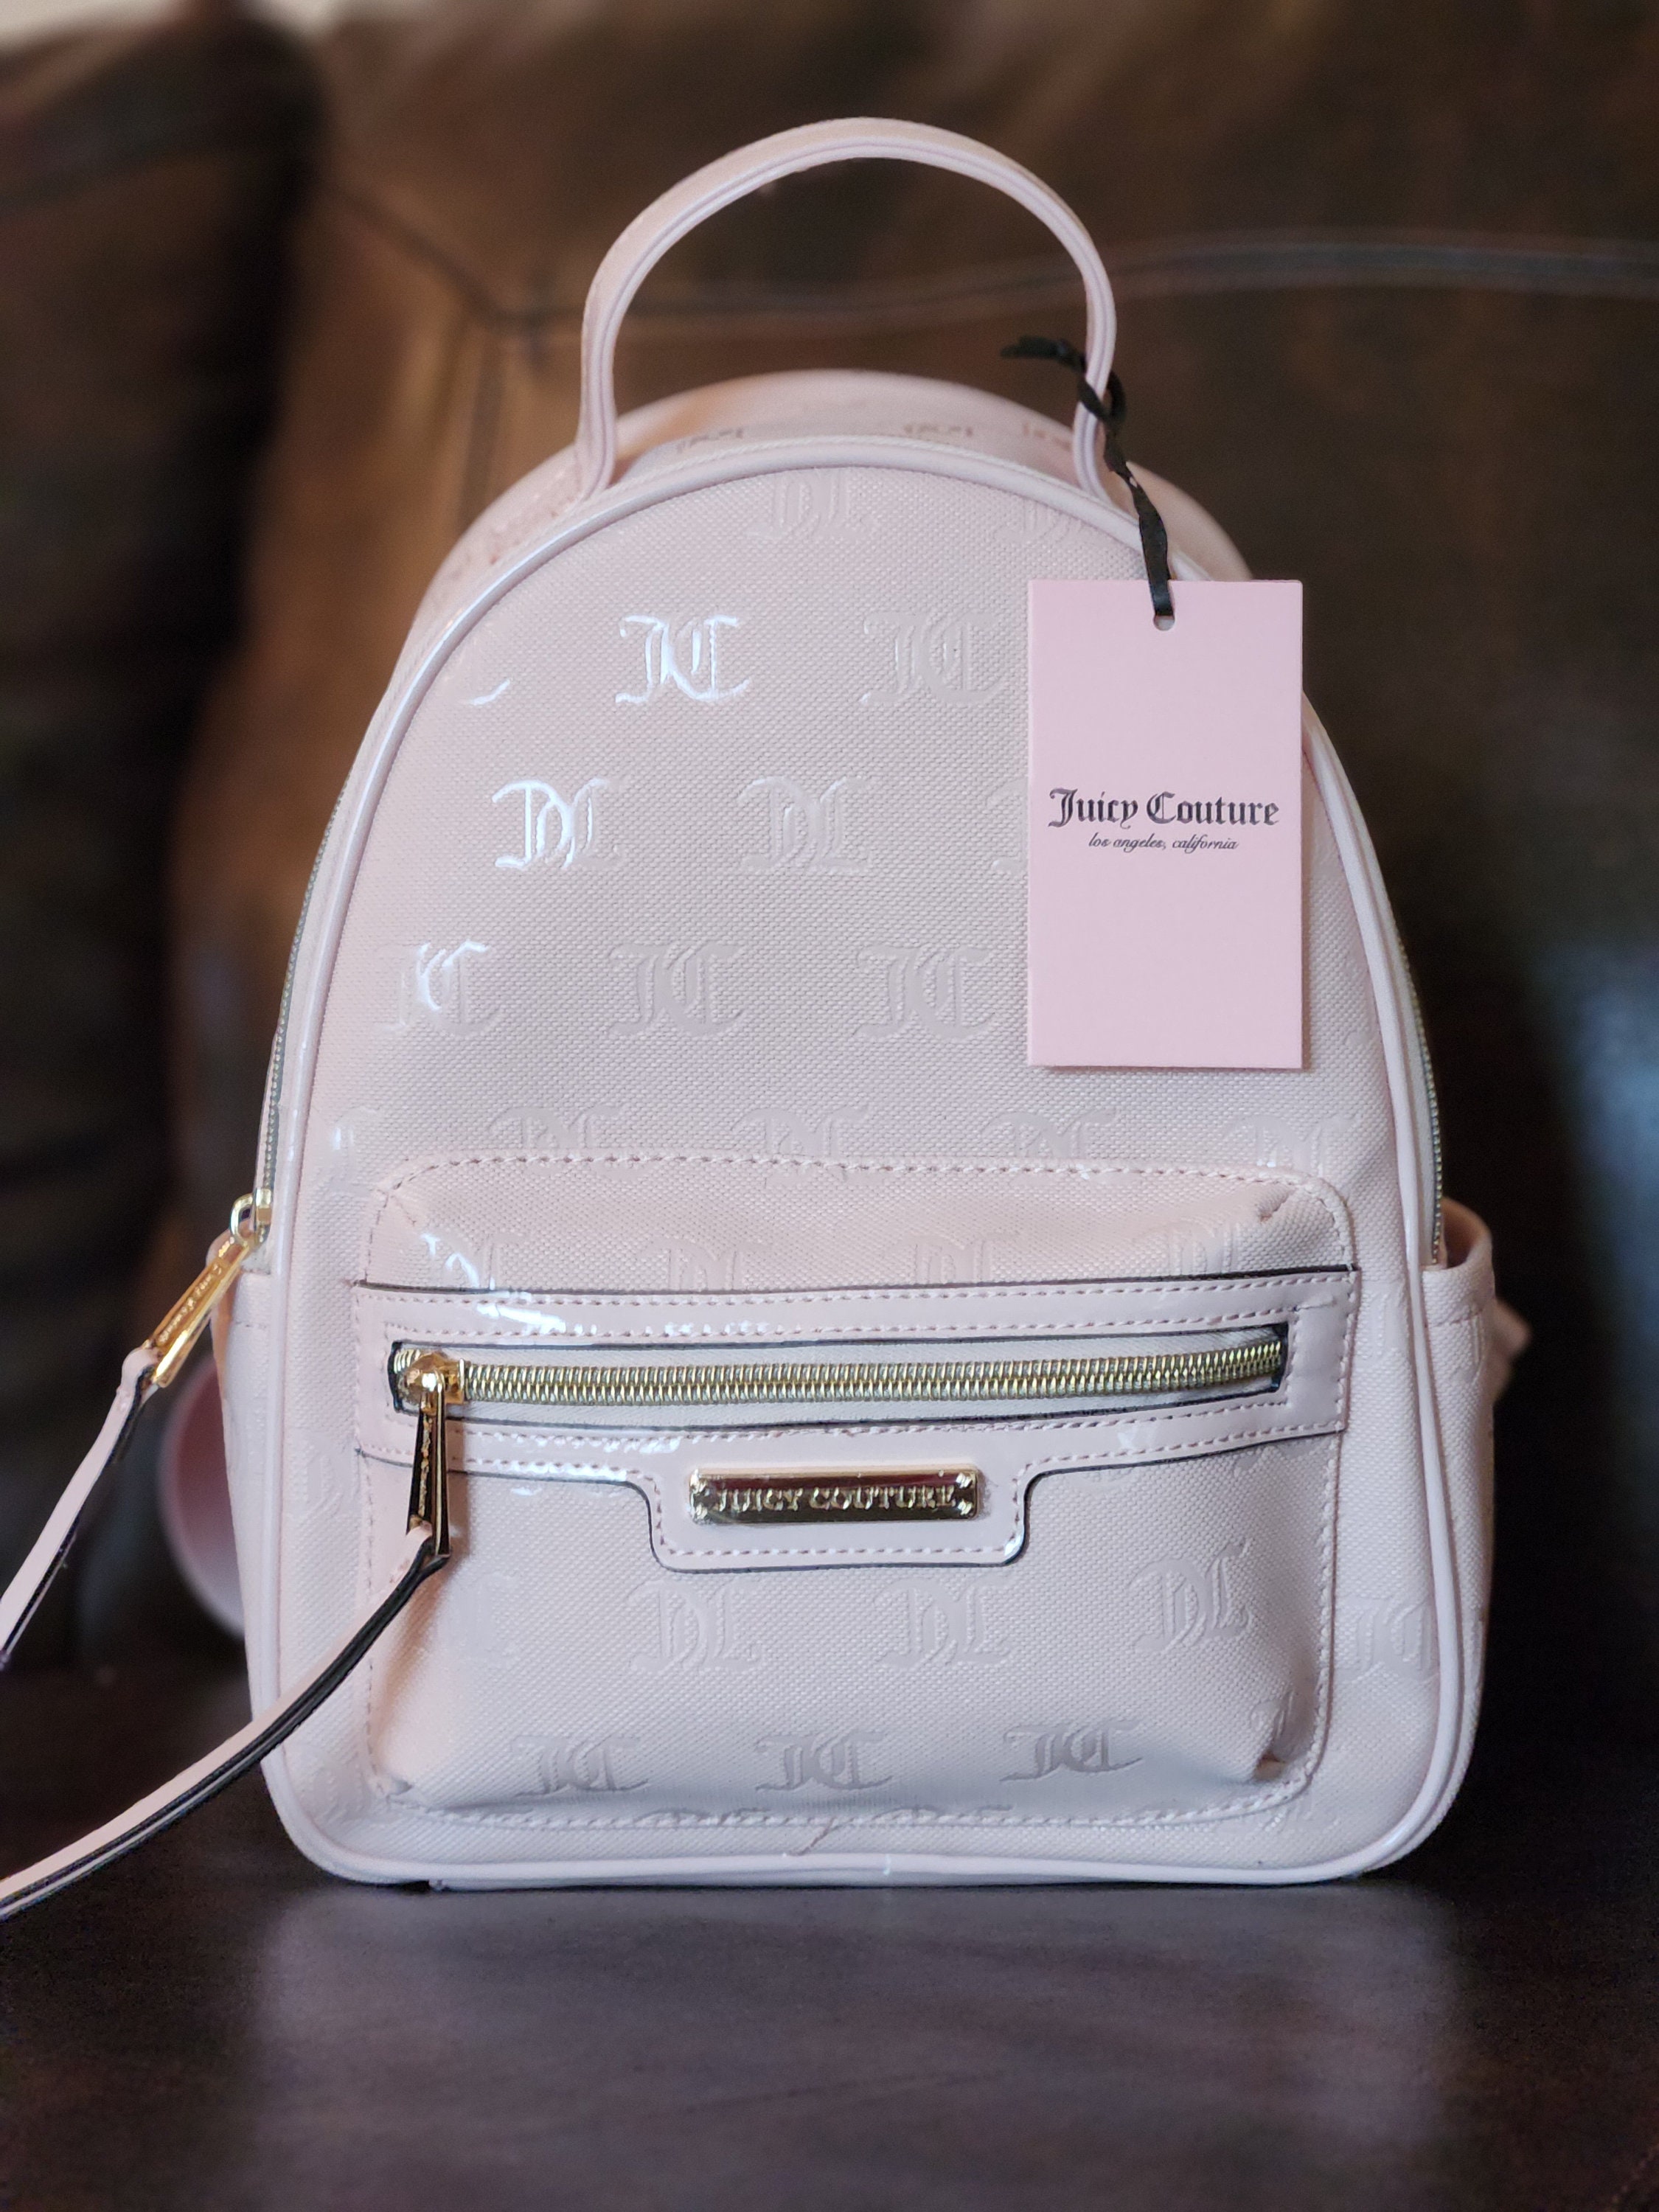 Juicy Couture mini backpack